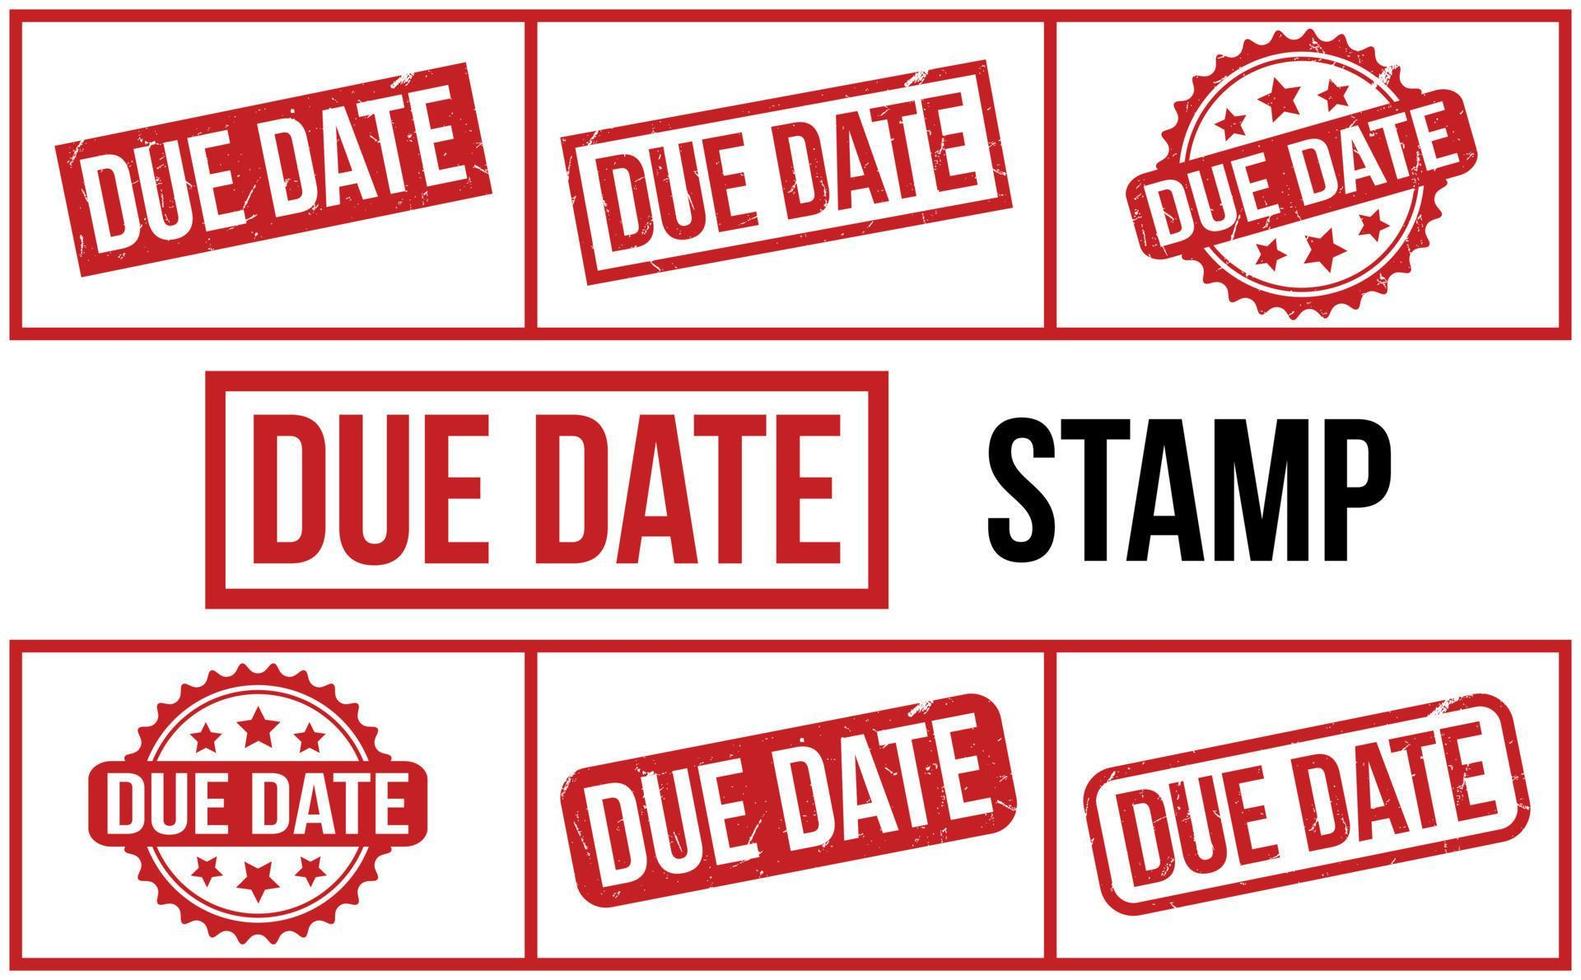 Due Date Rubber Stamp Set Vector